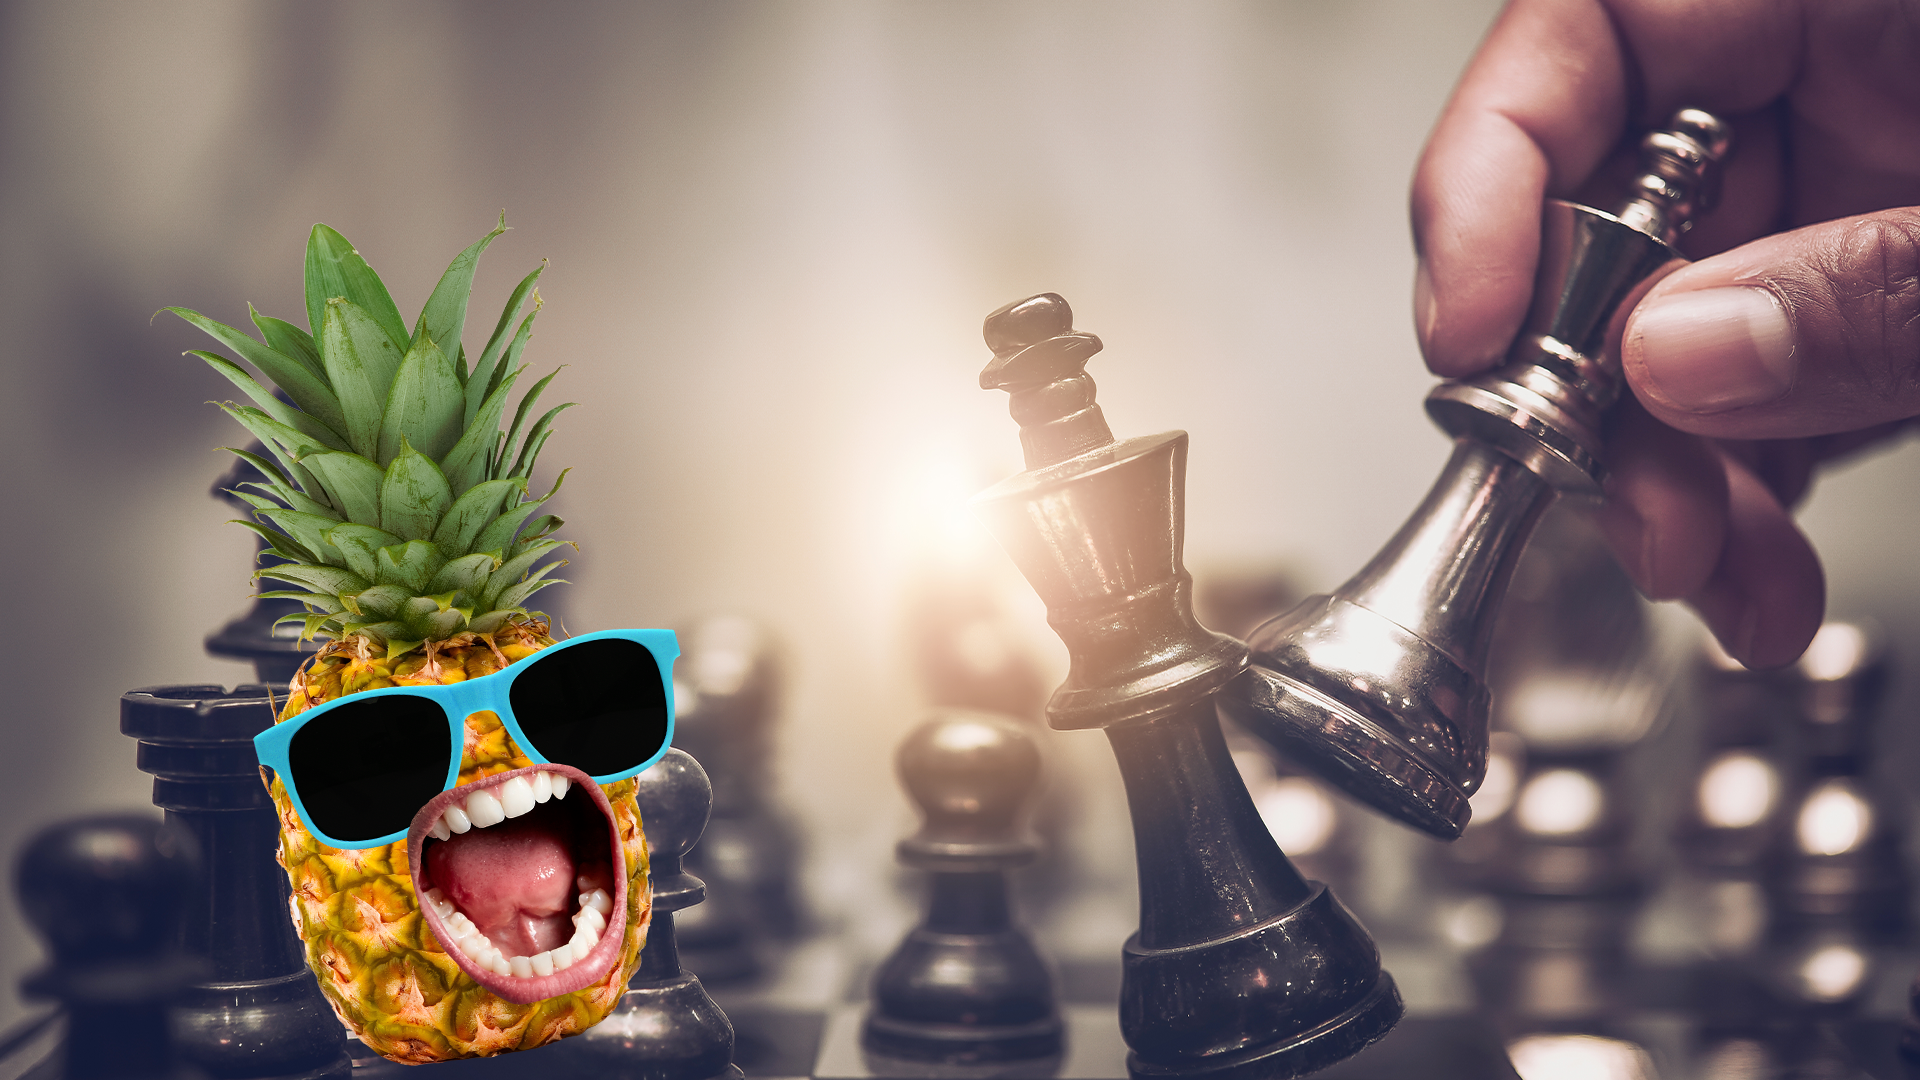 Chess pieces and pineapple 